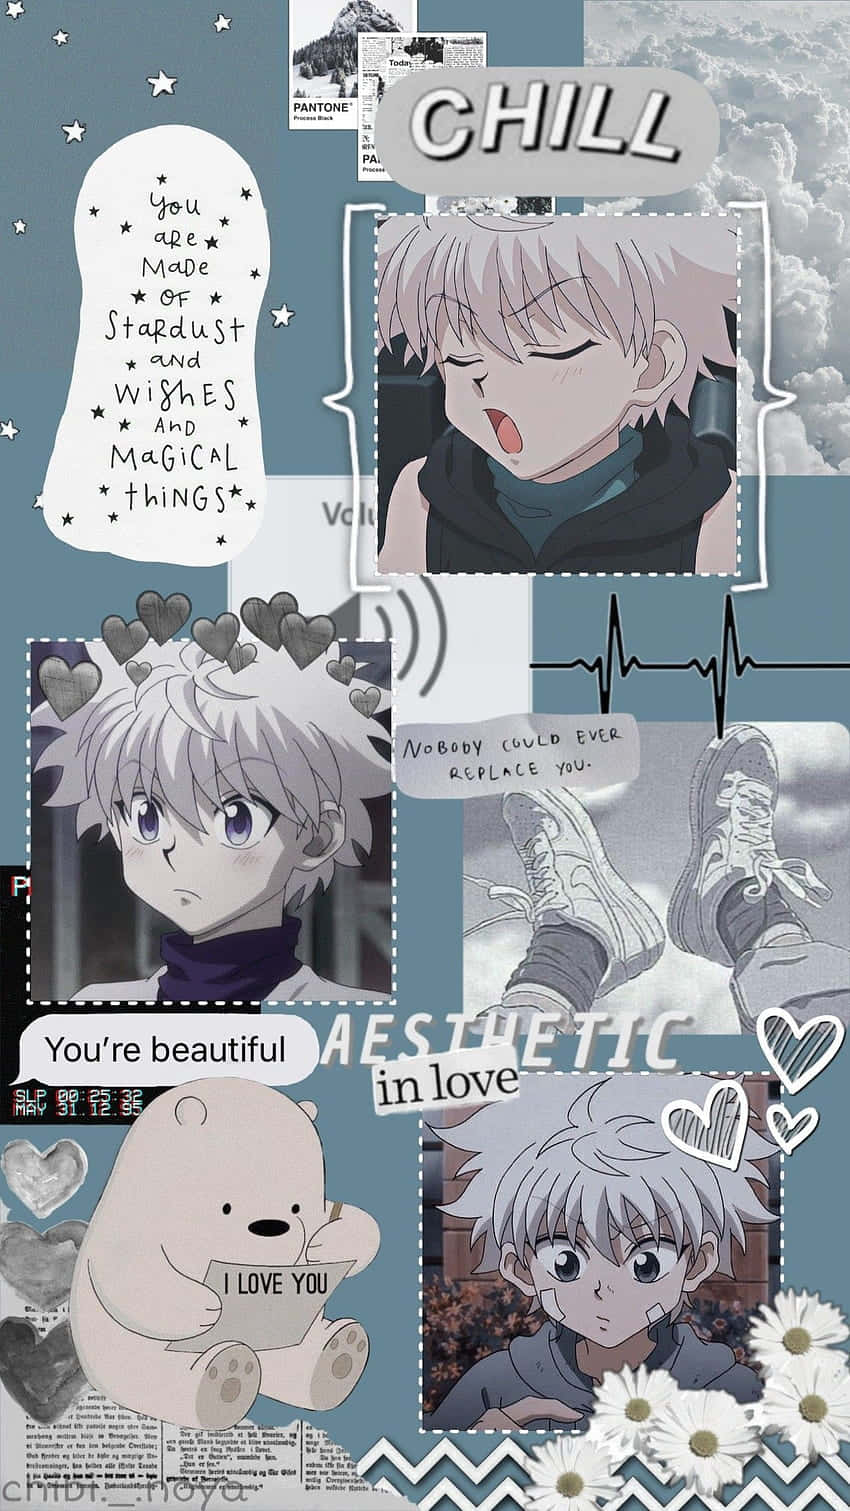 Get ready to unlock the power of Killua with this amazing phone Wallpaper